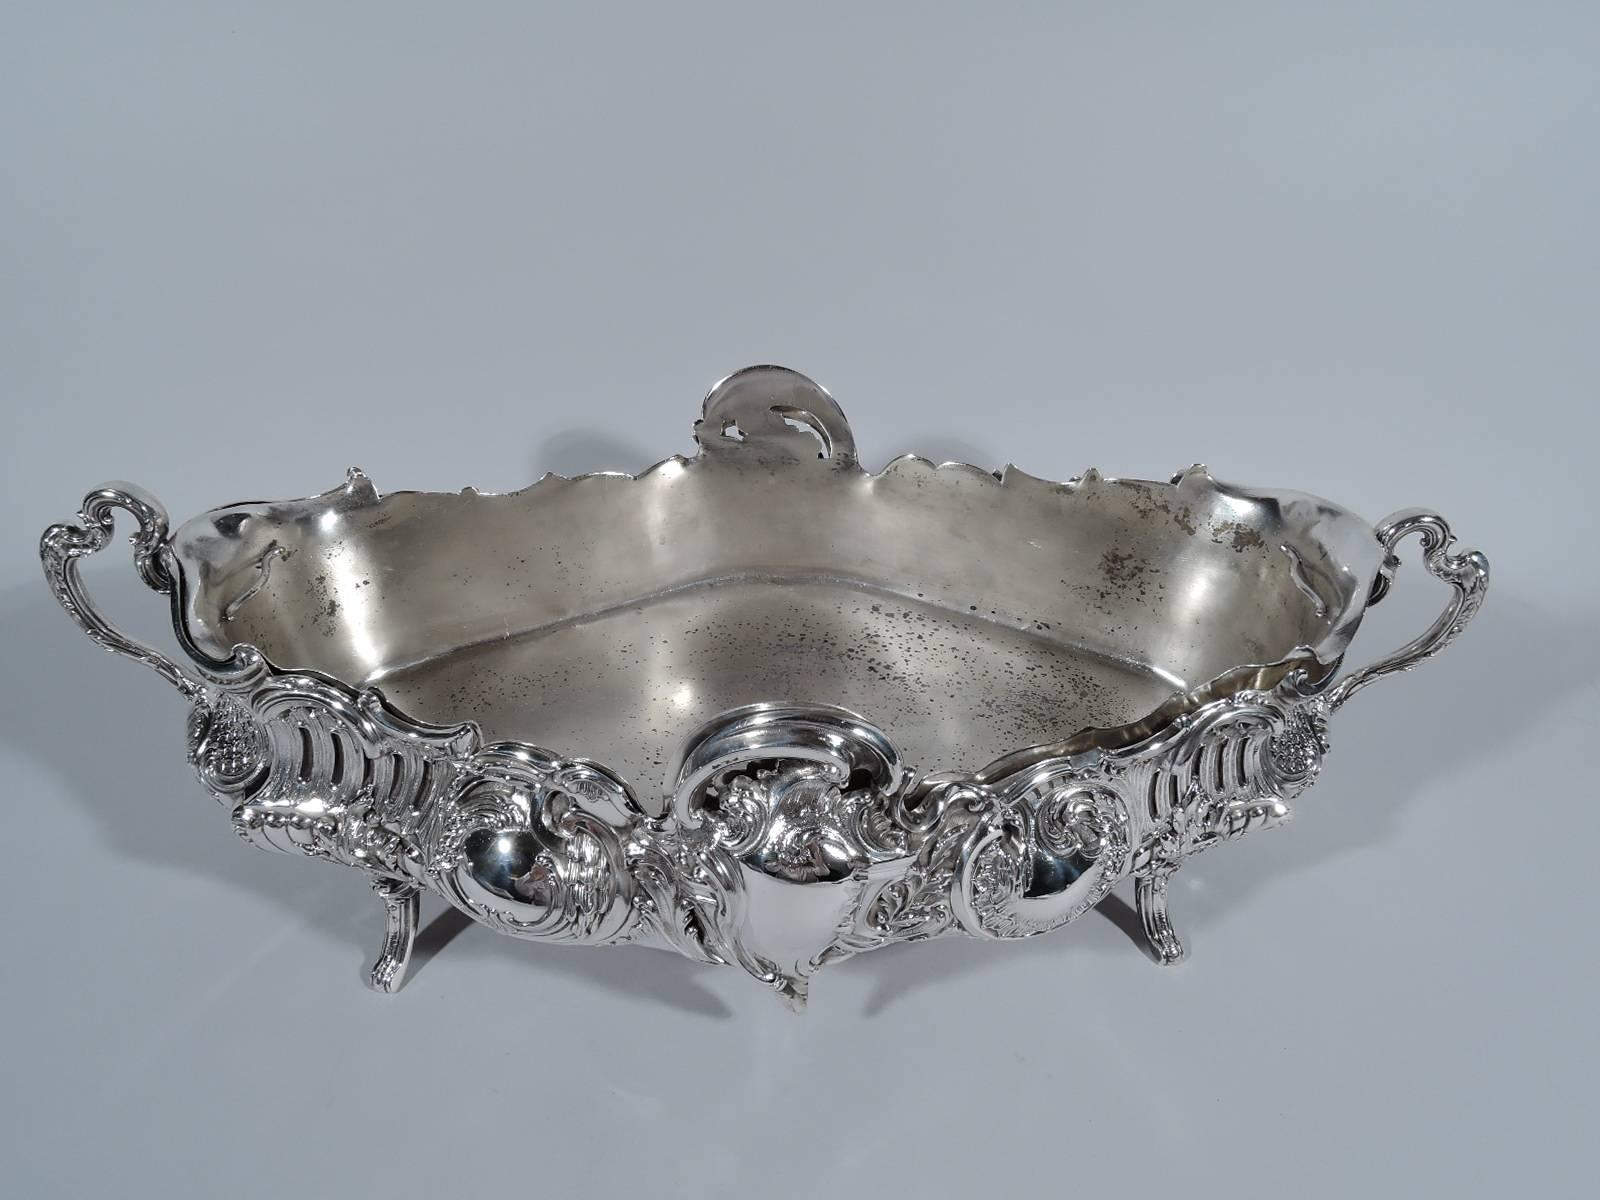 Belle Époque 950 silver jardinière. Made by V. Boivin in Paris, circa 1900. Lozenge form with scrolled end handles and four leaf-mounted supports. Scrolls, foliage, piercing, and scrolled and asymmetrical frames (vacant). A frothy